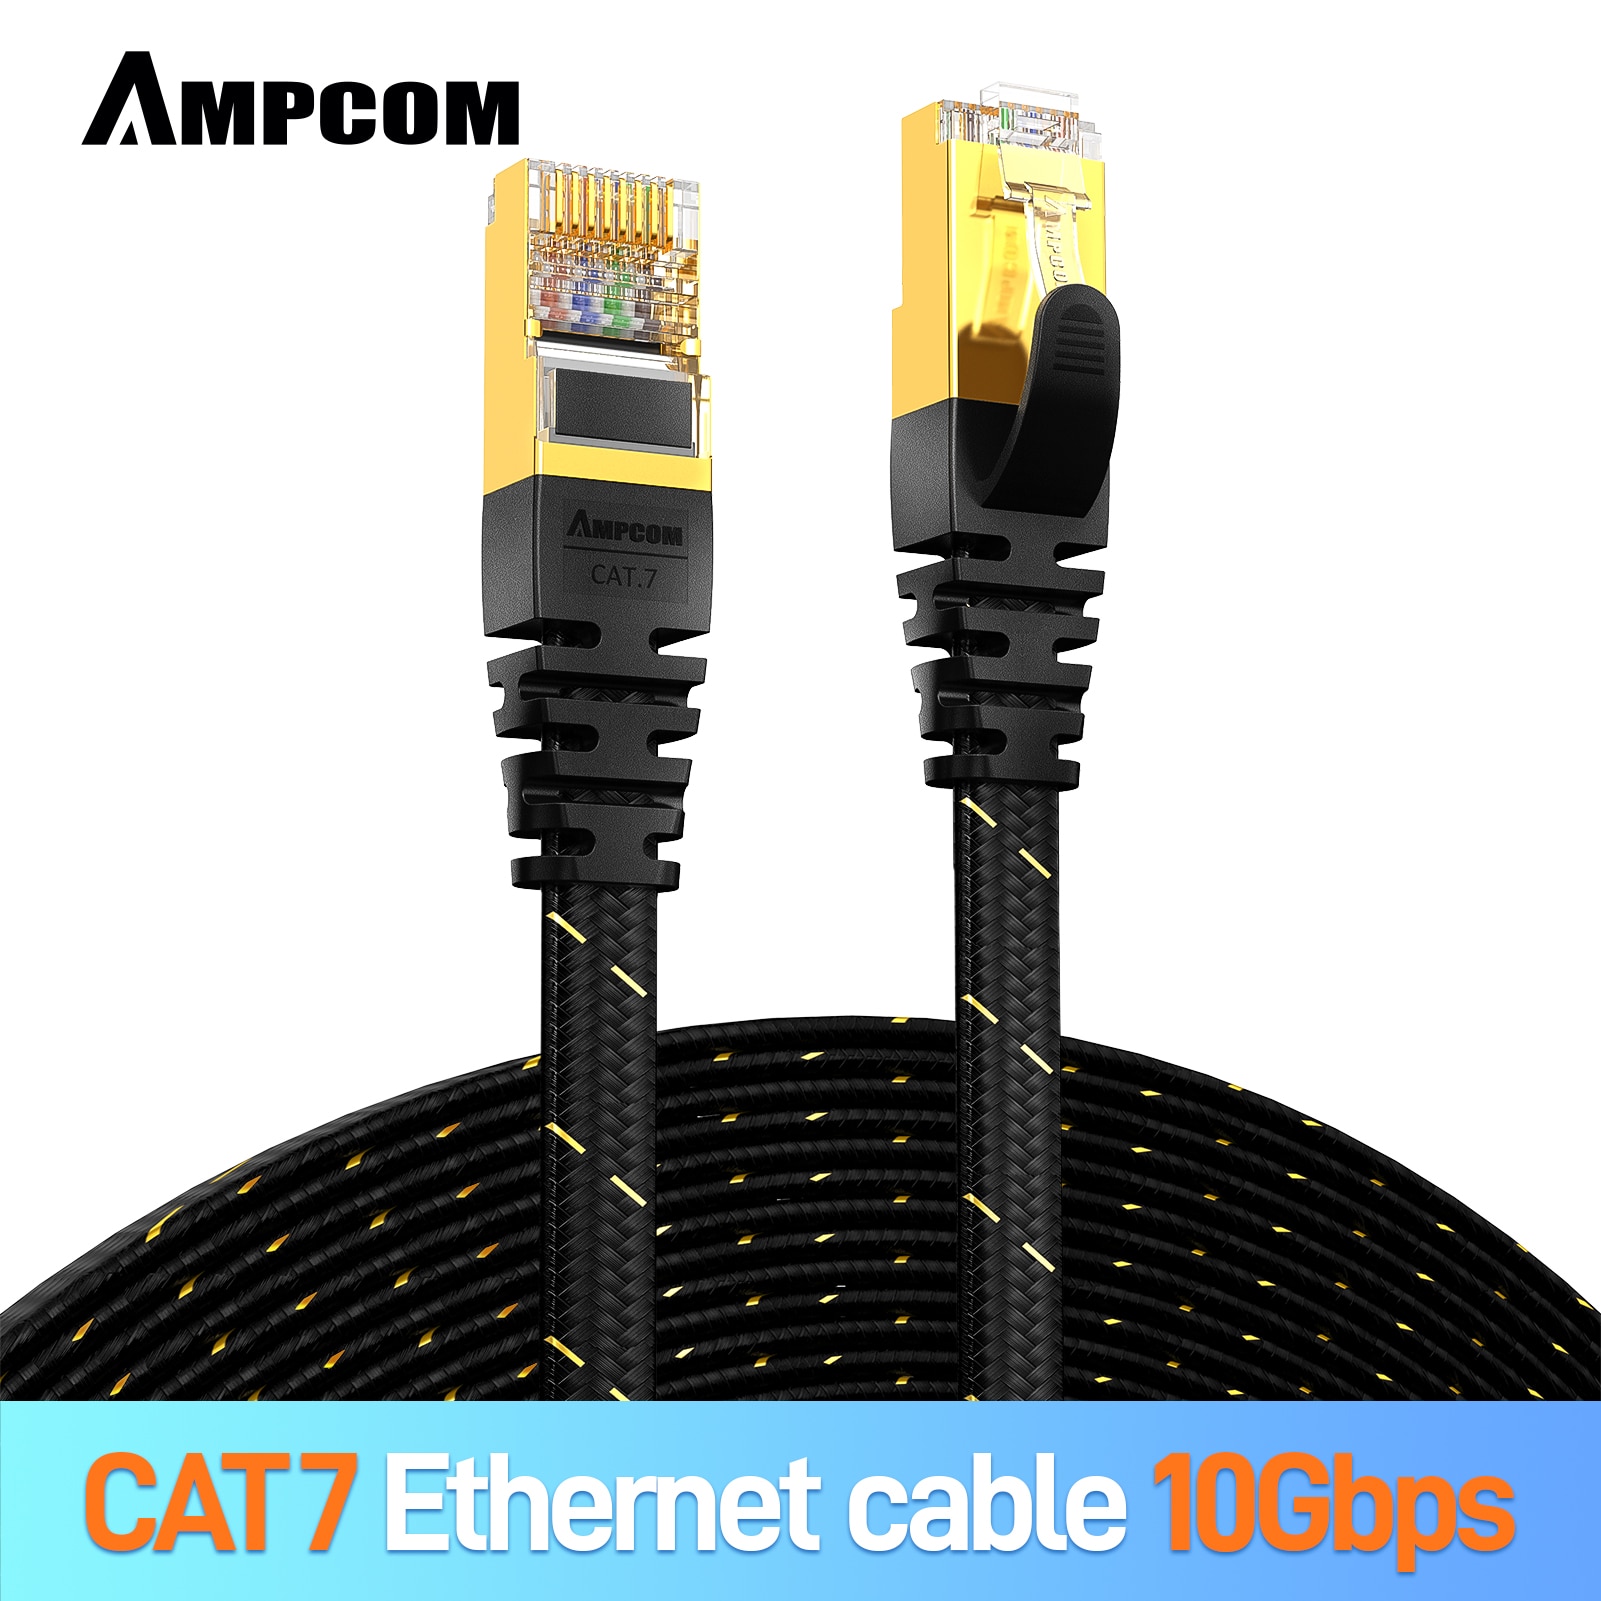 AMPCOM CAT7 Ethernet Cable (10G 600MHz), Shielded Flat RJ45 Network Patch Cord, 50u Gold Plated Lead, Polyester Braided